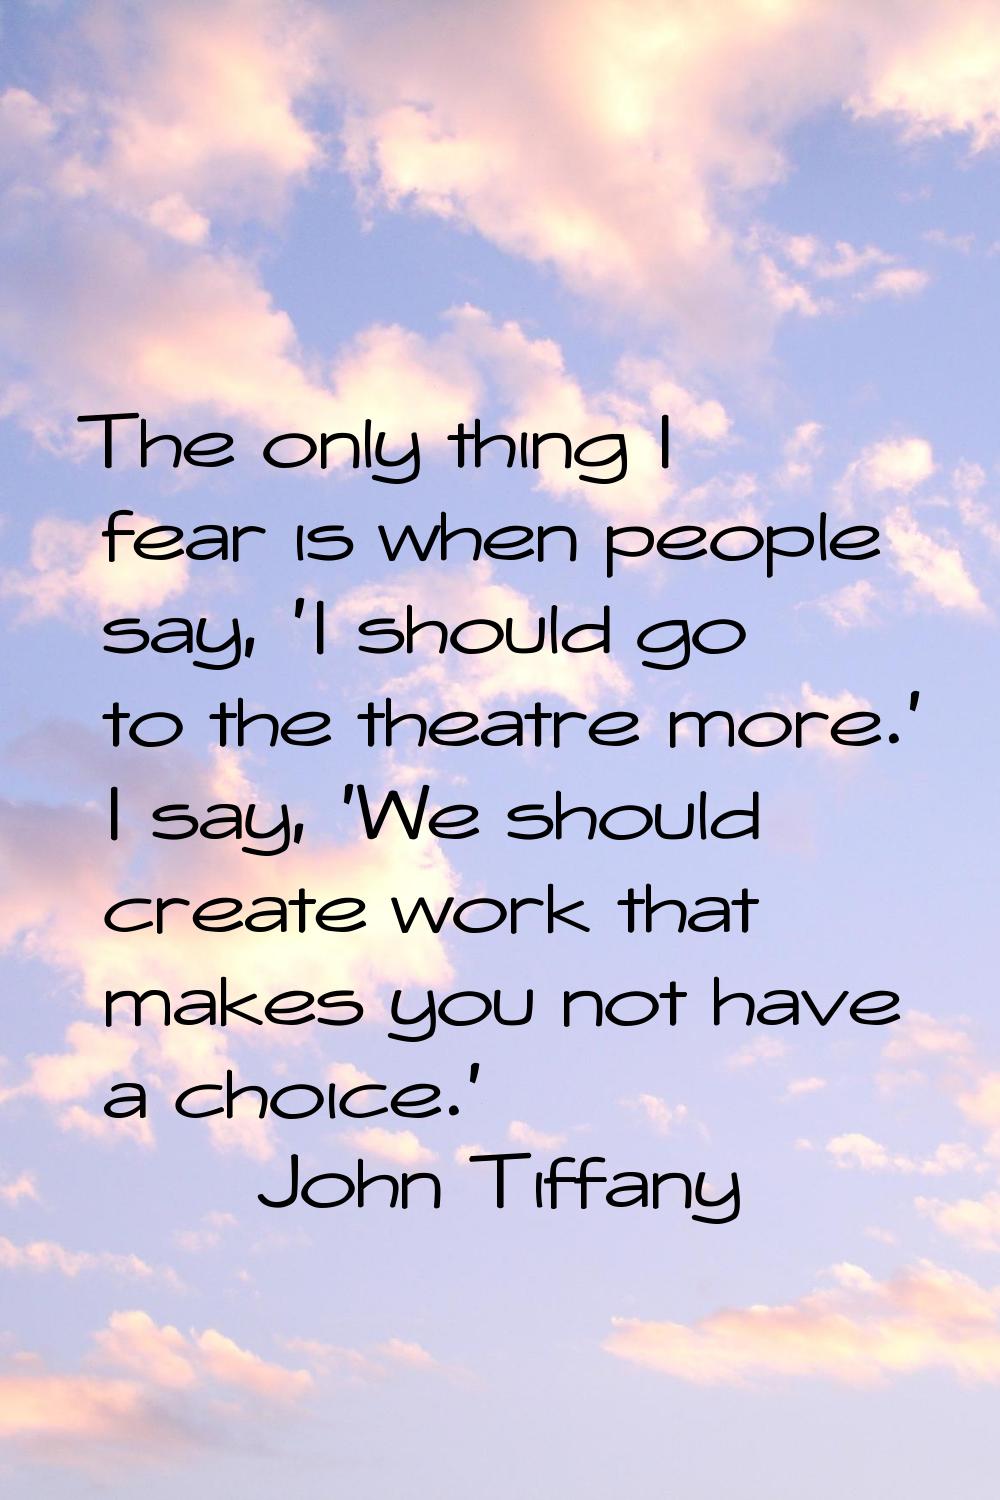 The only thing I fear is when people say, 'I should go to the theatre more.' I say, 'We should crea